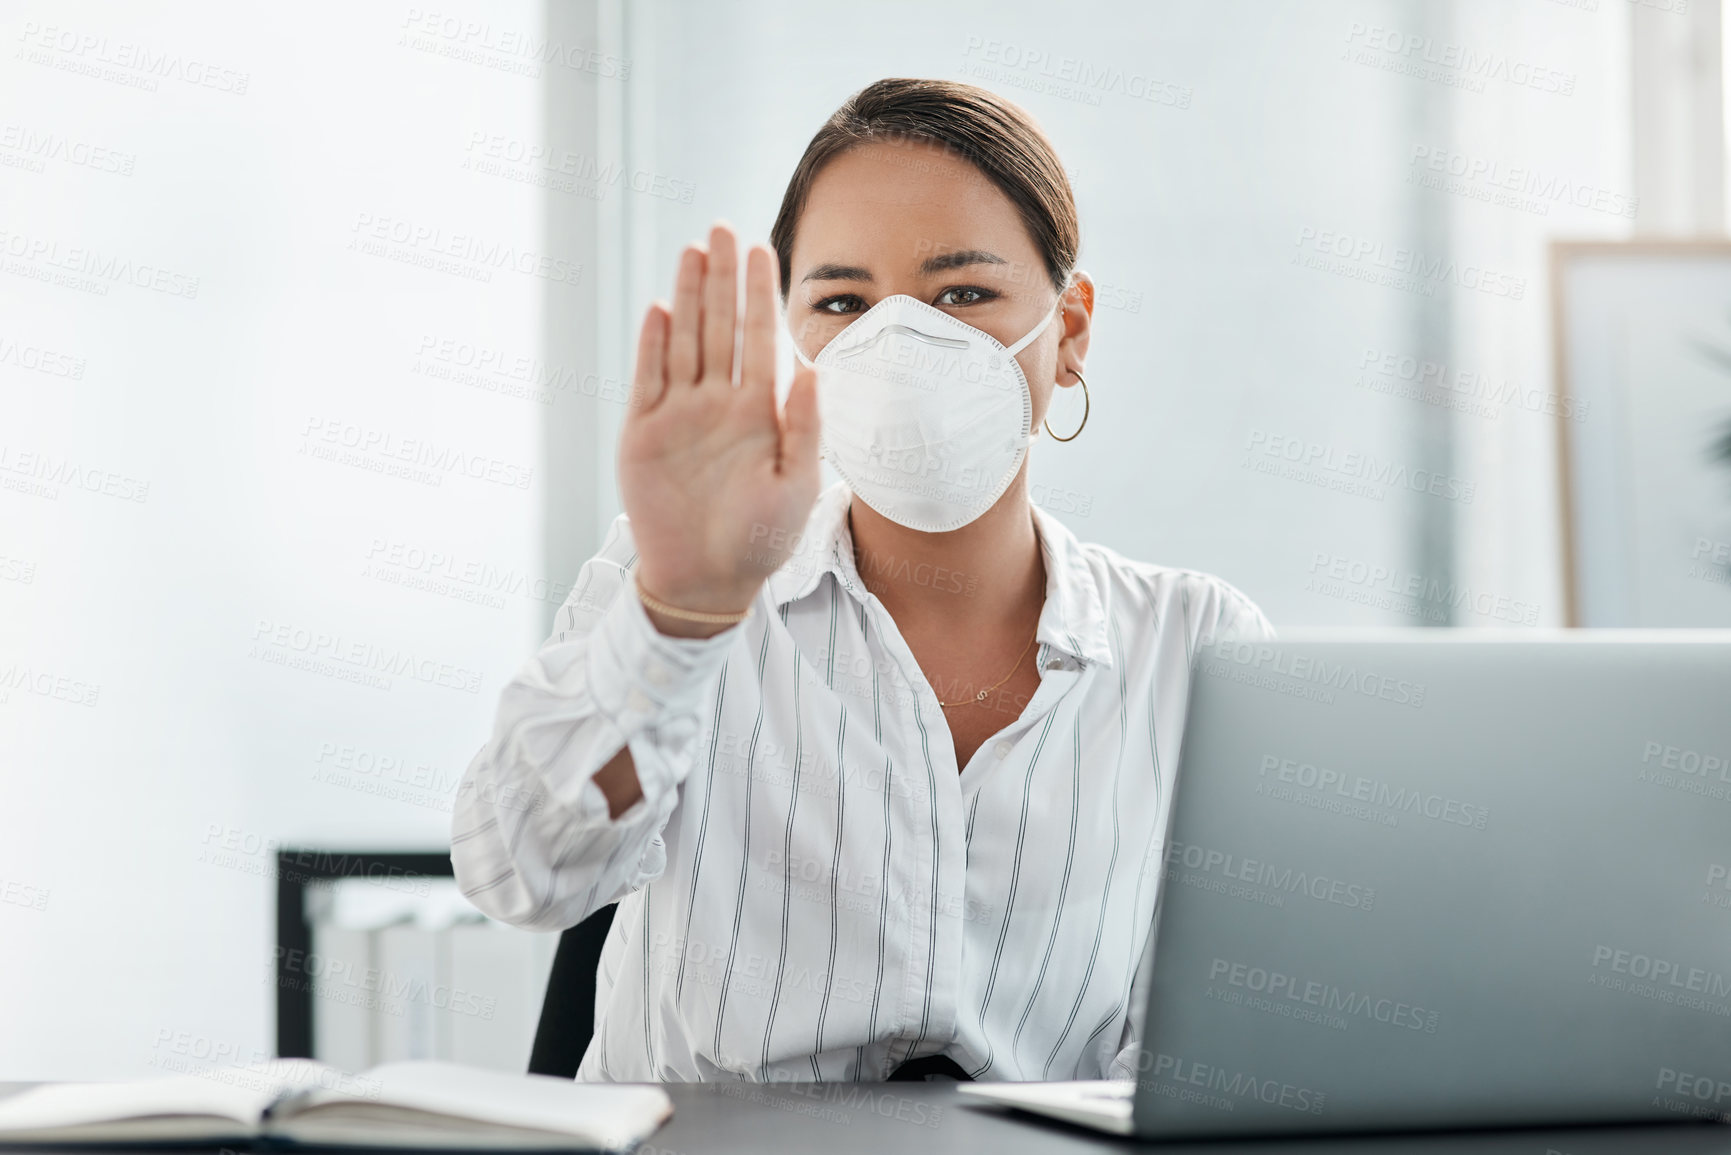 Buy stock photo Shot of a masked young businesswoman gesturing to stay away while working at her desk in a modern office